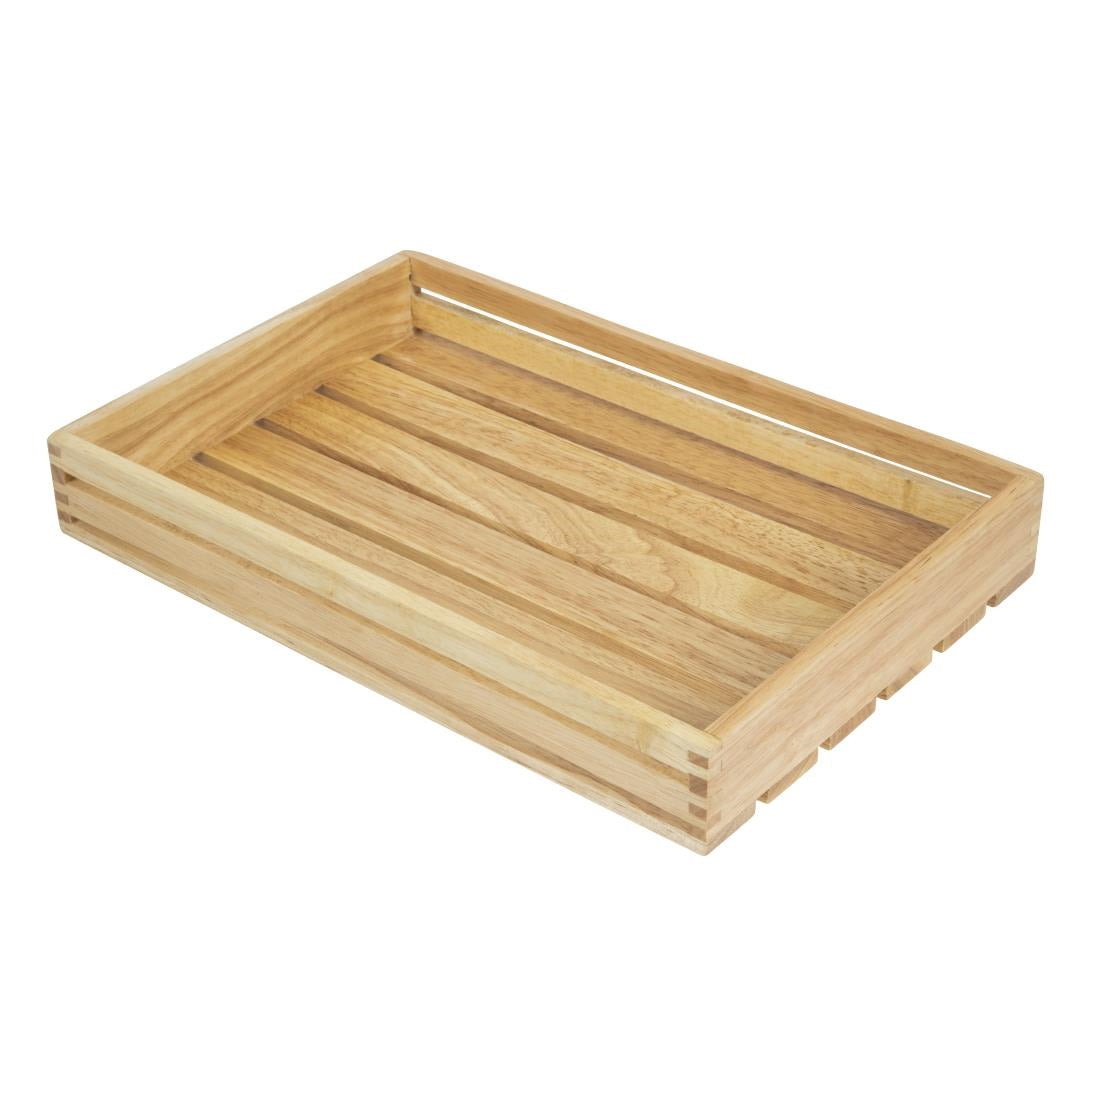 CK959 Olympia Low Sided Wooden Crate JD Catering Equipment Solutions Ltd